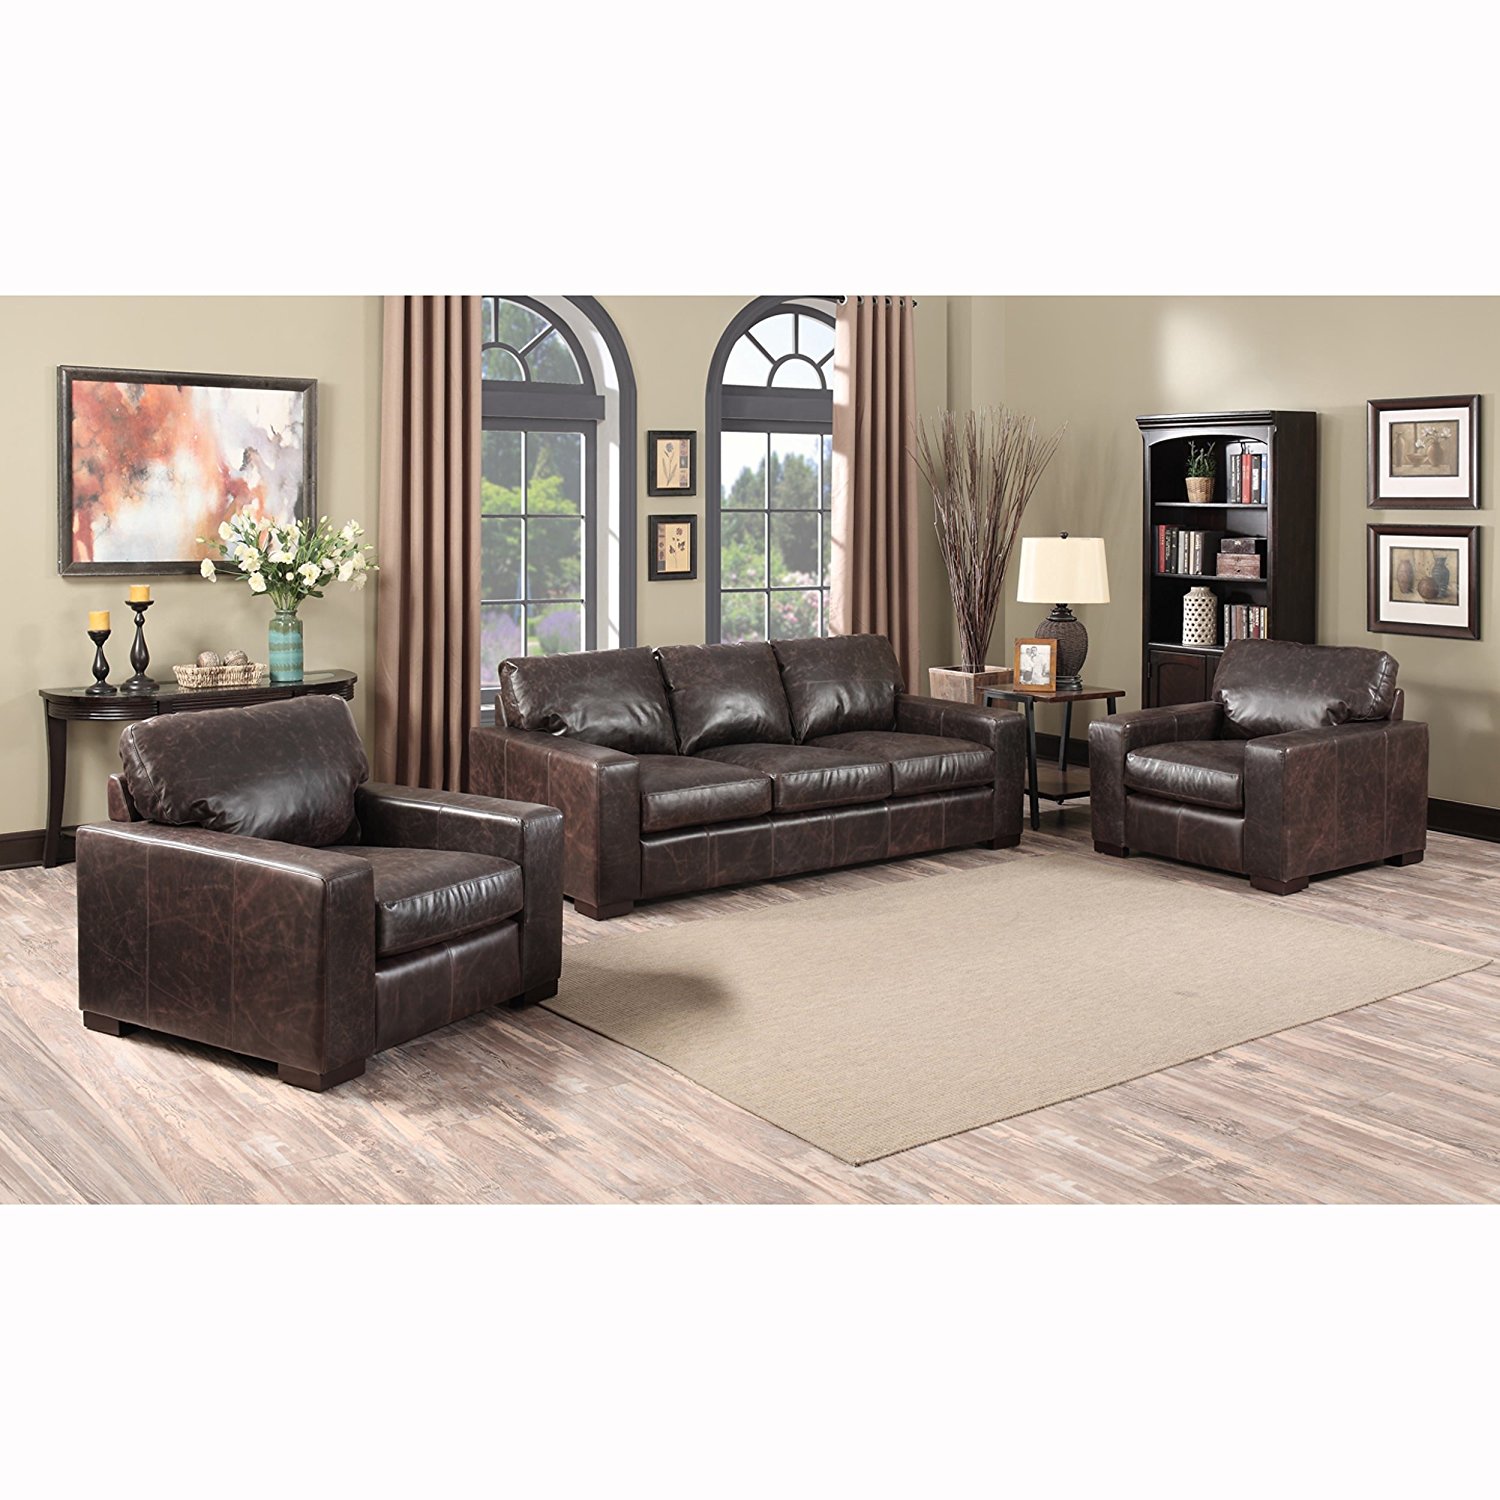 Sofaweb.com Inc. Maxweld Premium Distressed Brown Top Grain Leather Sofa and Two Chairs